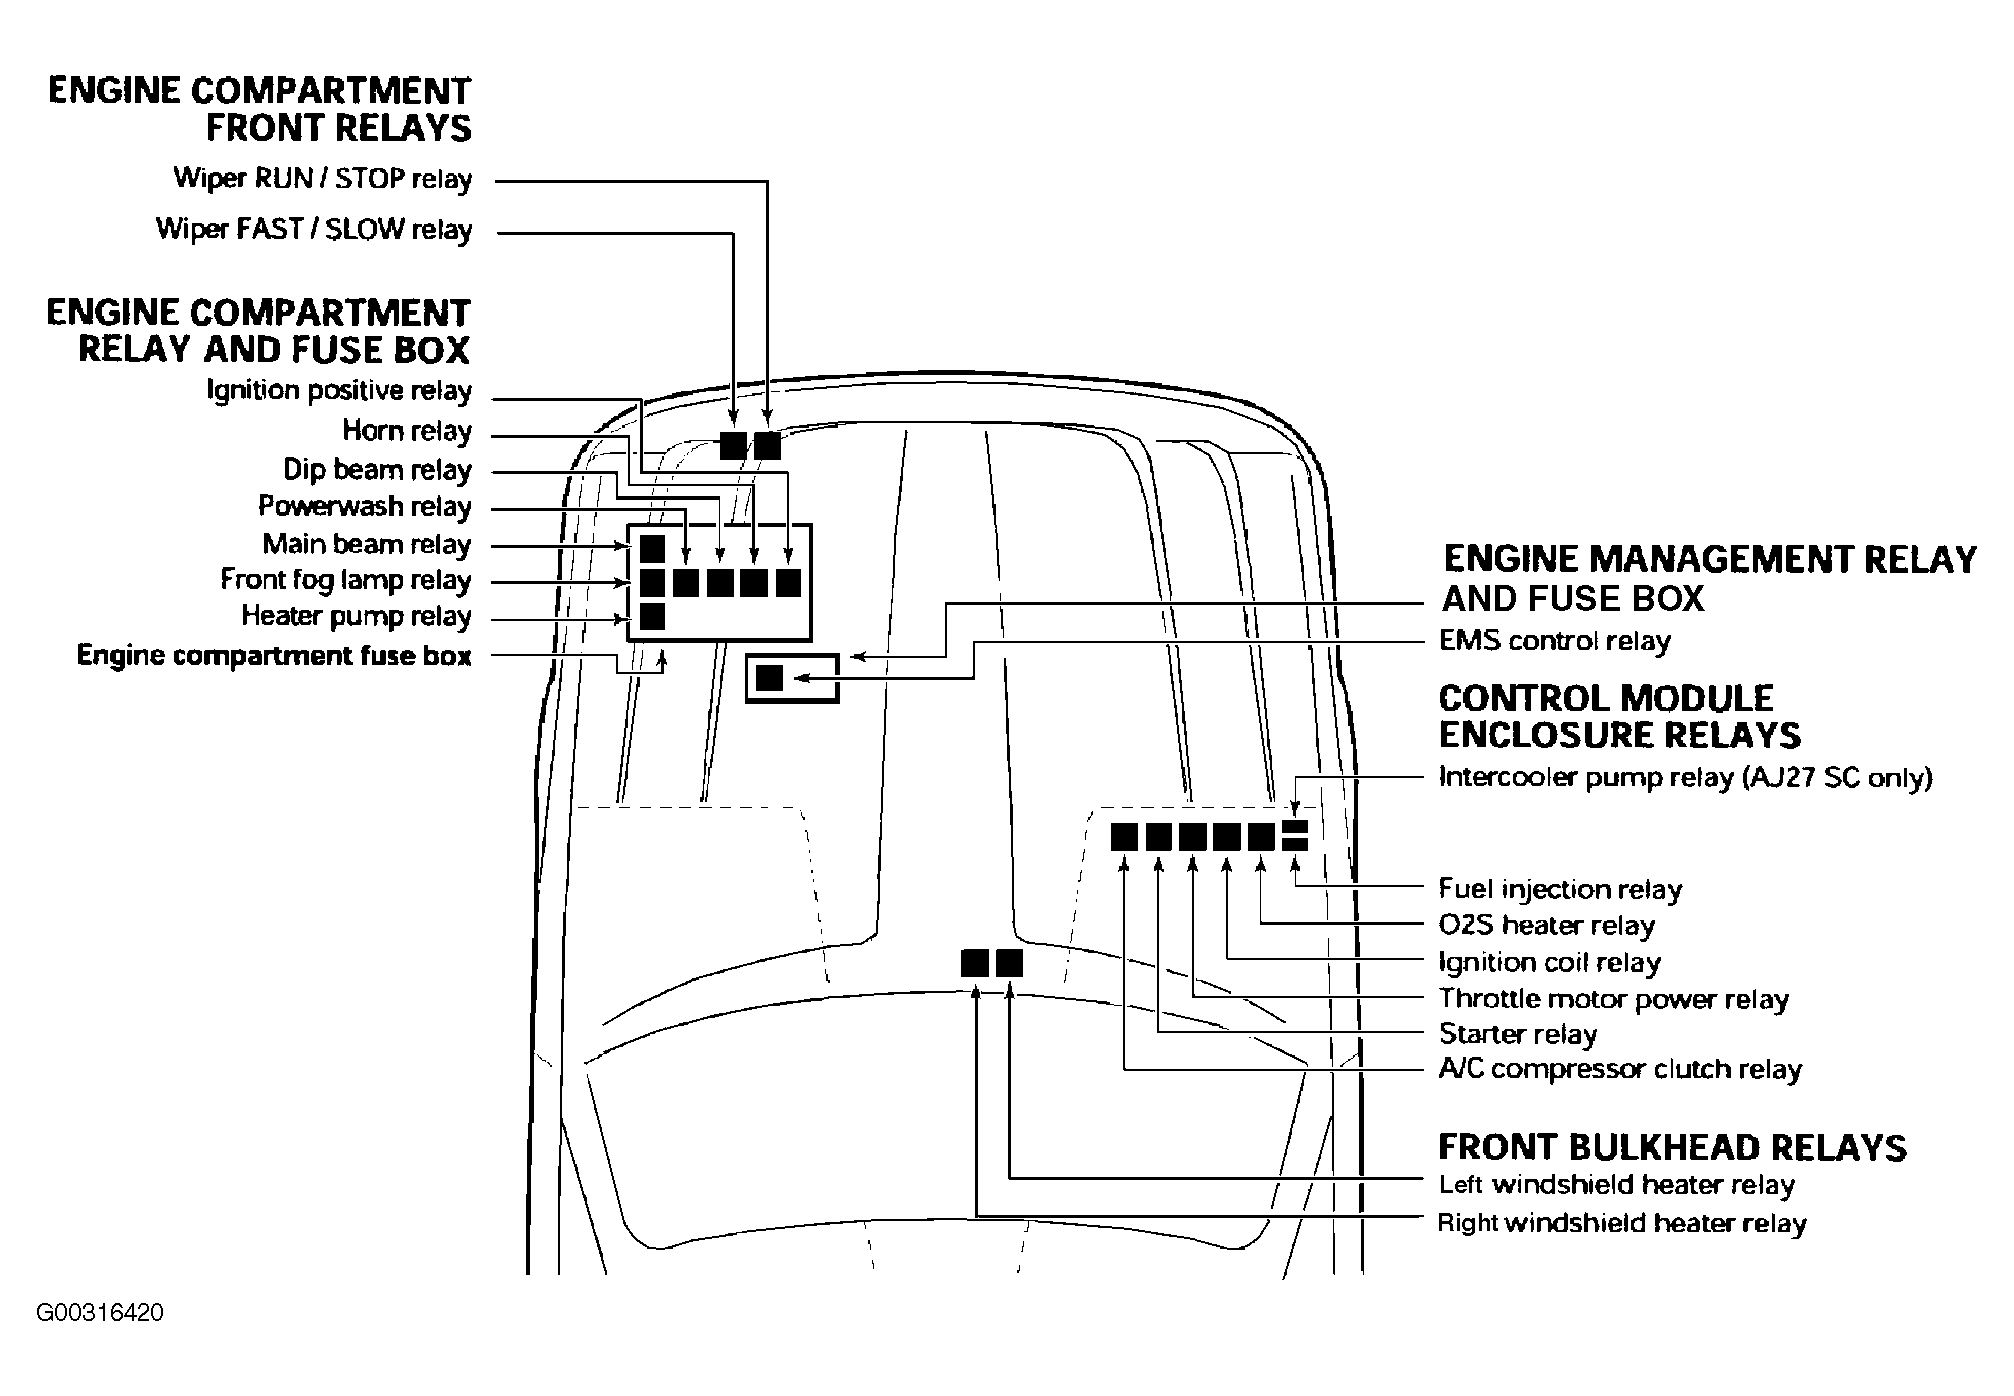 Jaguar XJR 100 2002 - Component Locations -  Identifying Engine Compartment Fuse/Relay Locations